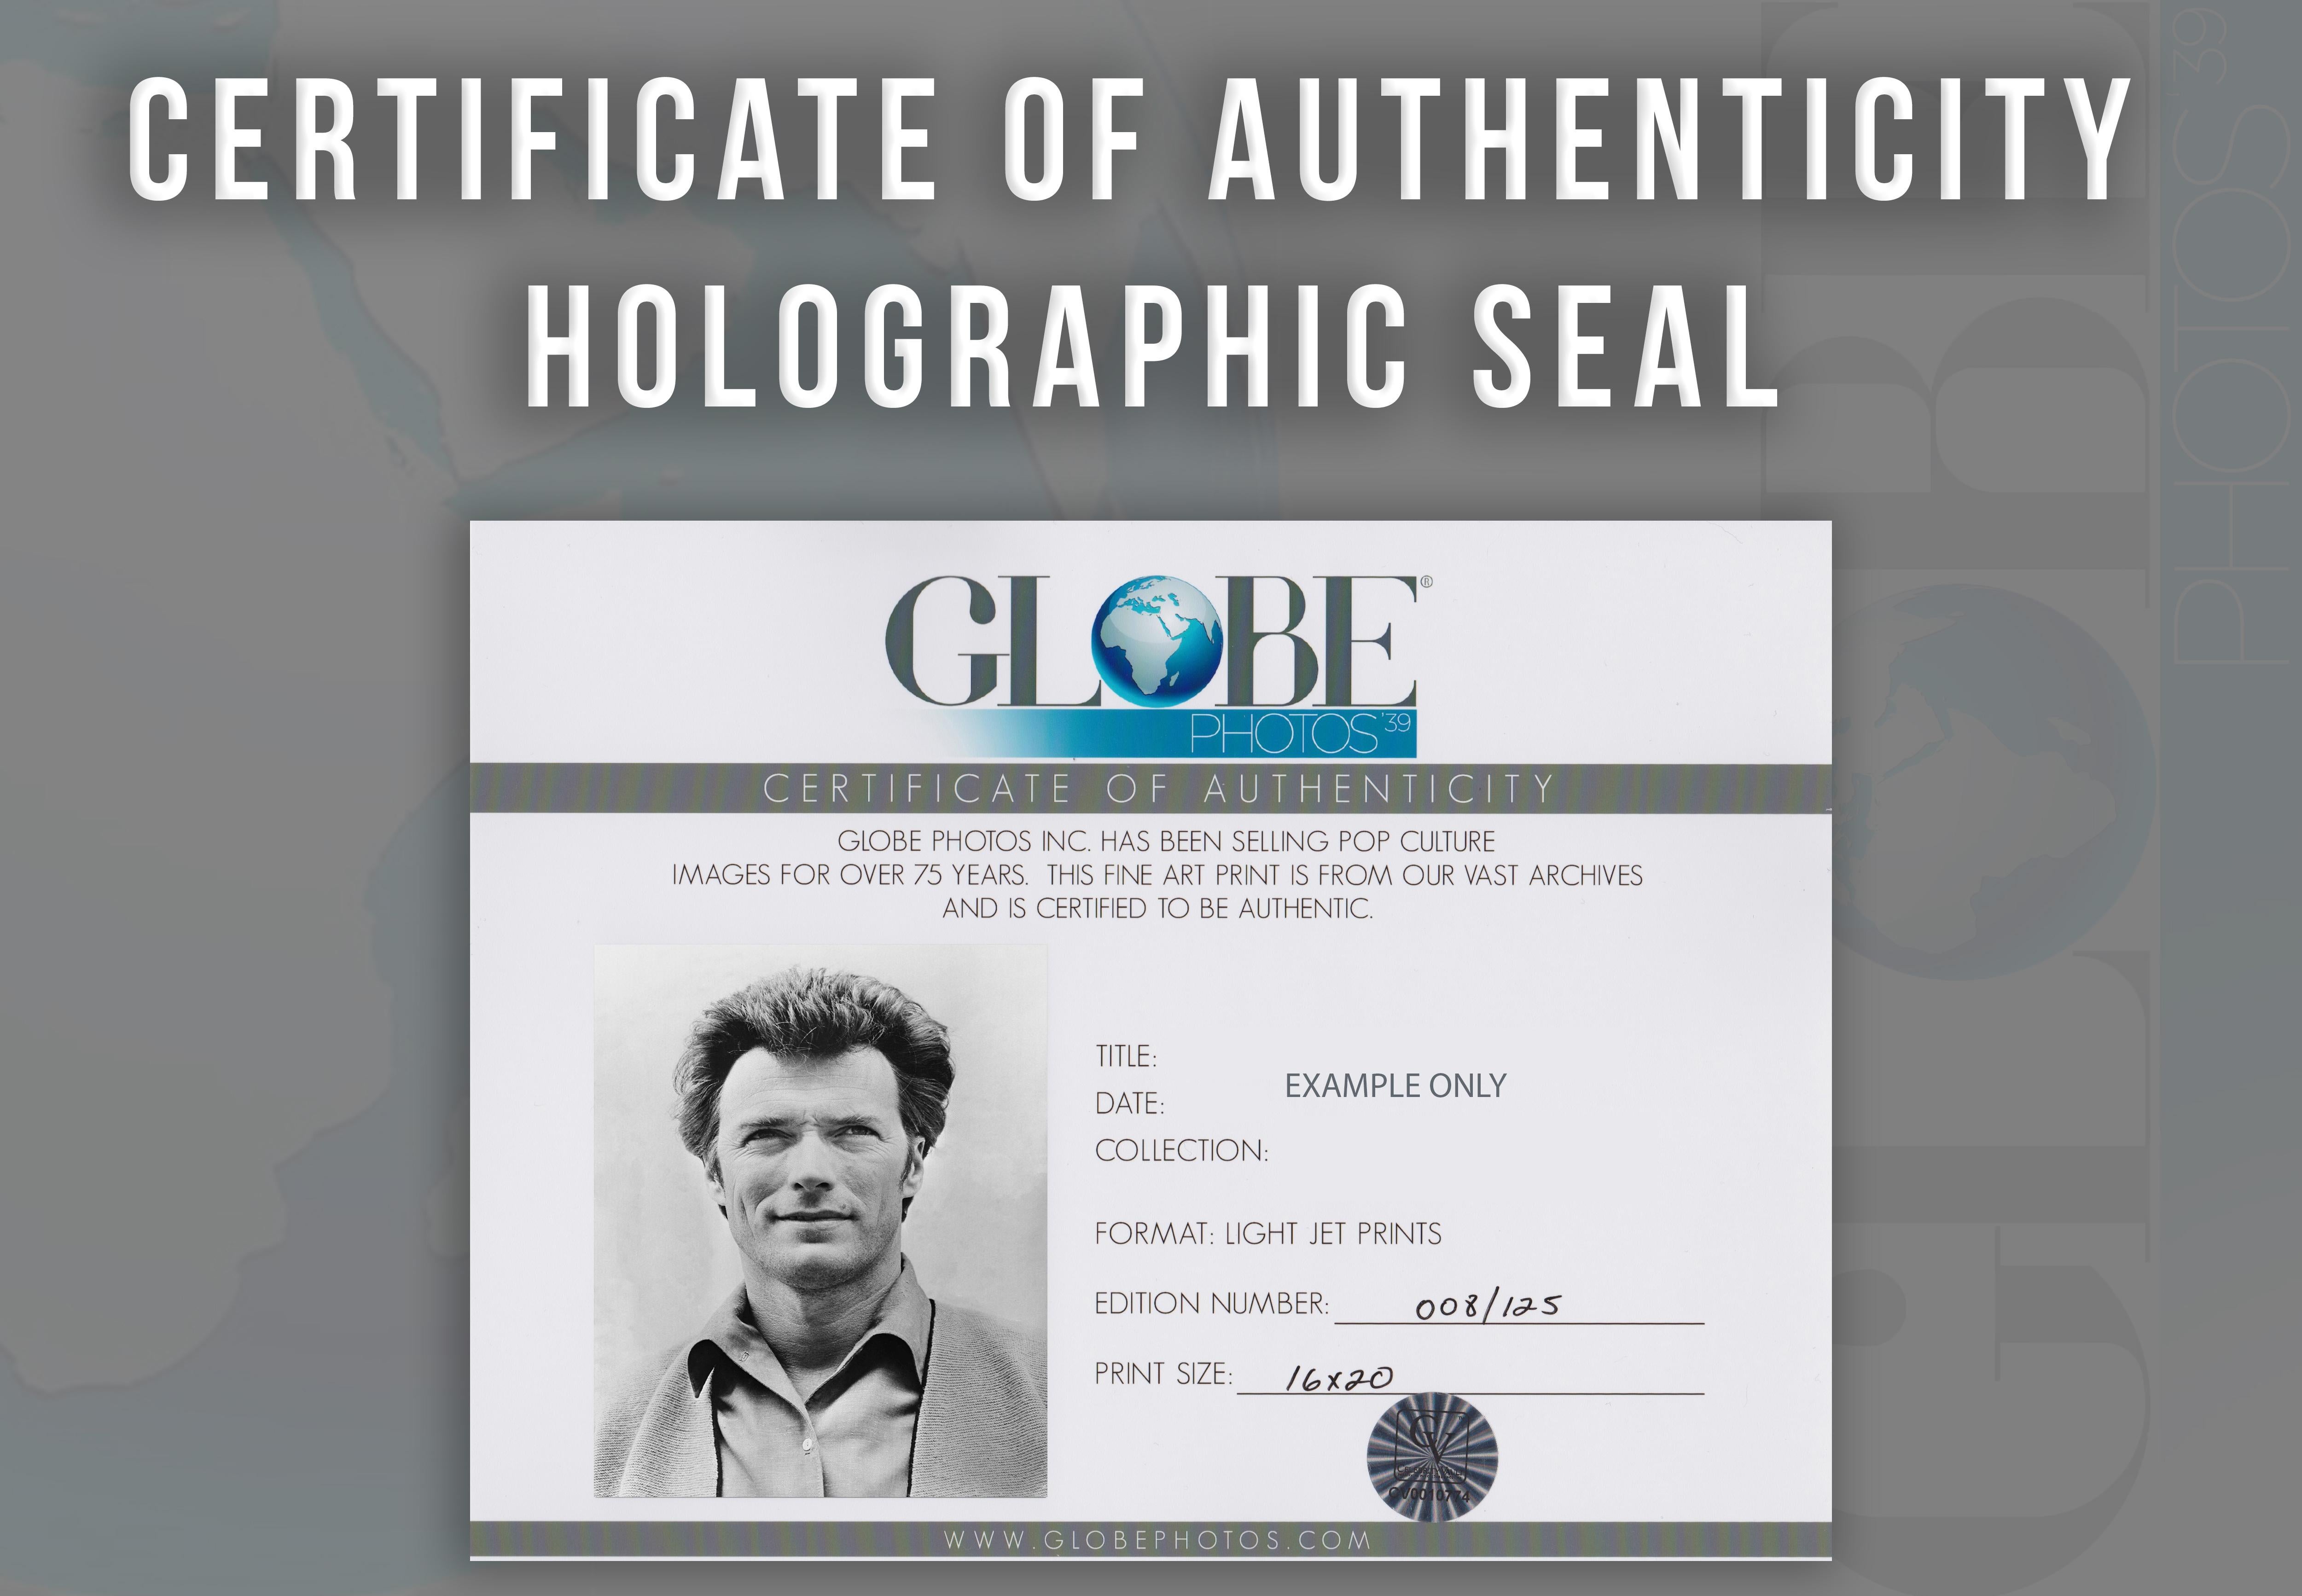 Clint Eastwood: Handsome Star Actor Globe Photos Fine Art Print - Gray Portrait Photograph by Unknown